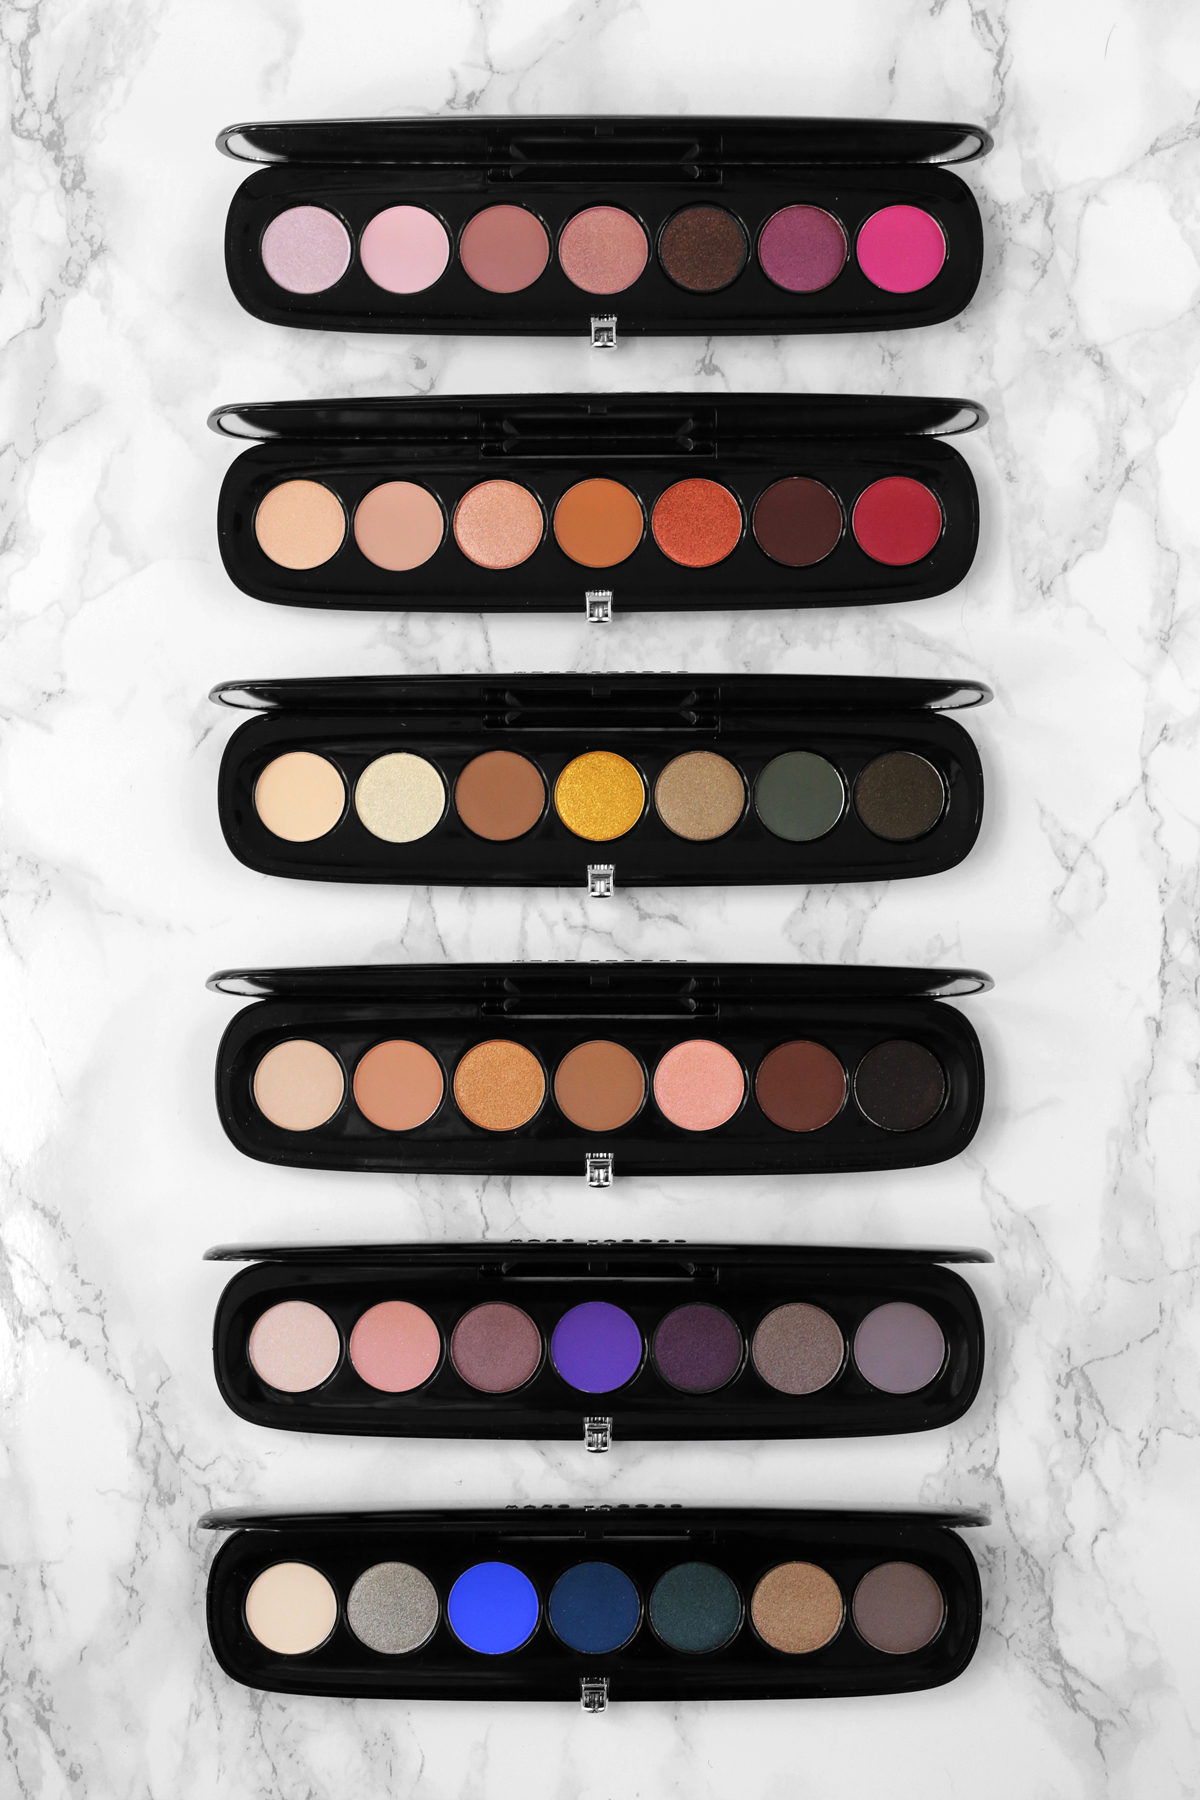 Marc Jacobs  Eye-Conic Palettes Review & Look-book - JACKIEMONTT